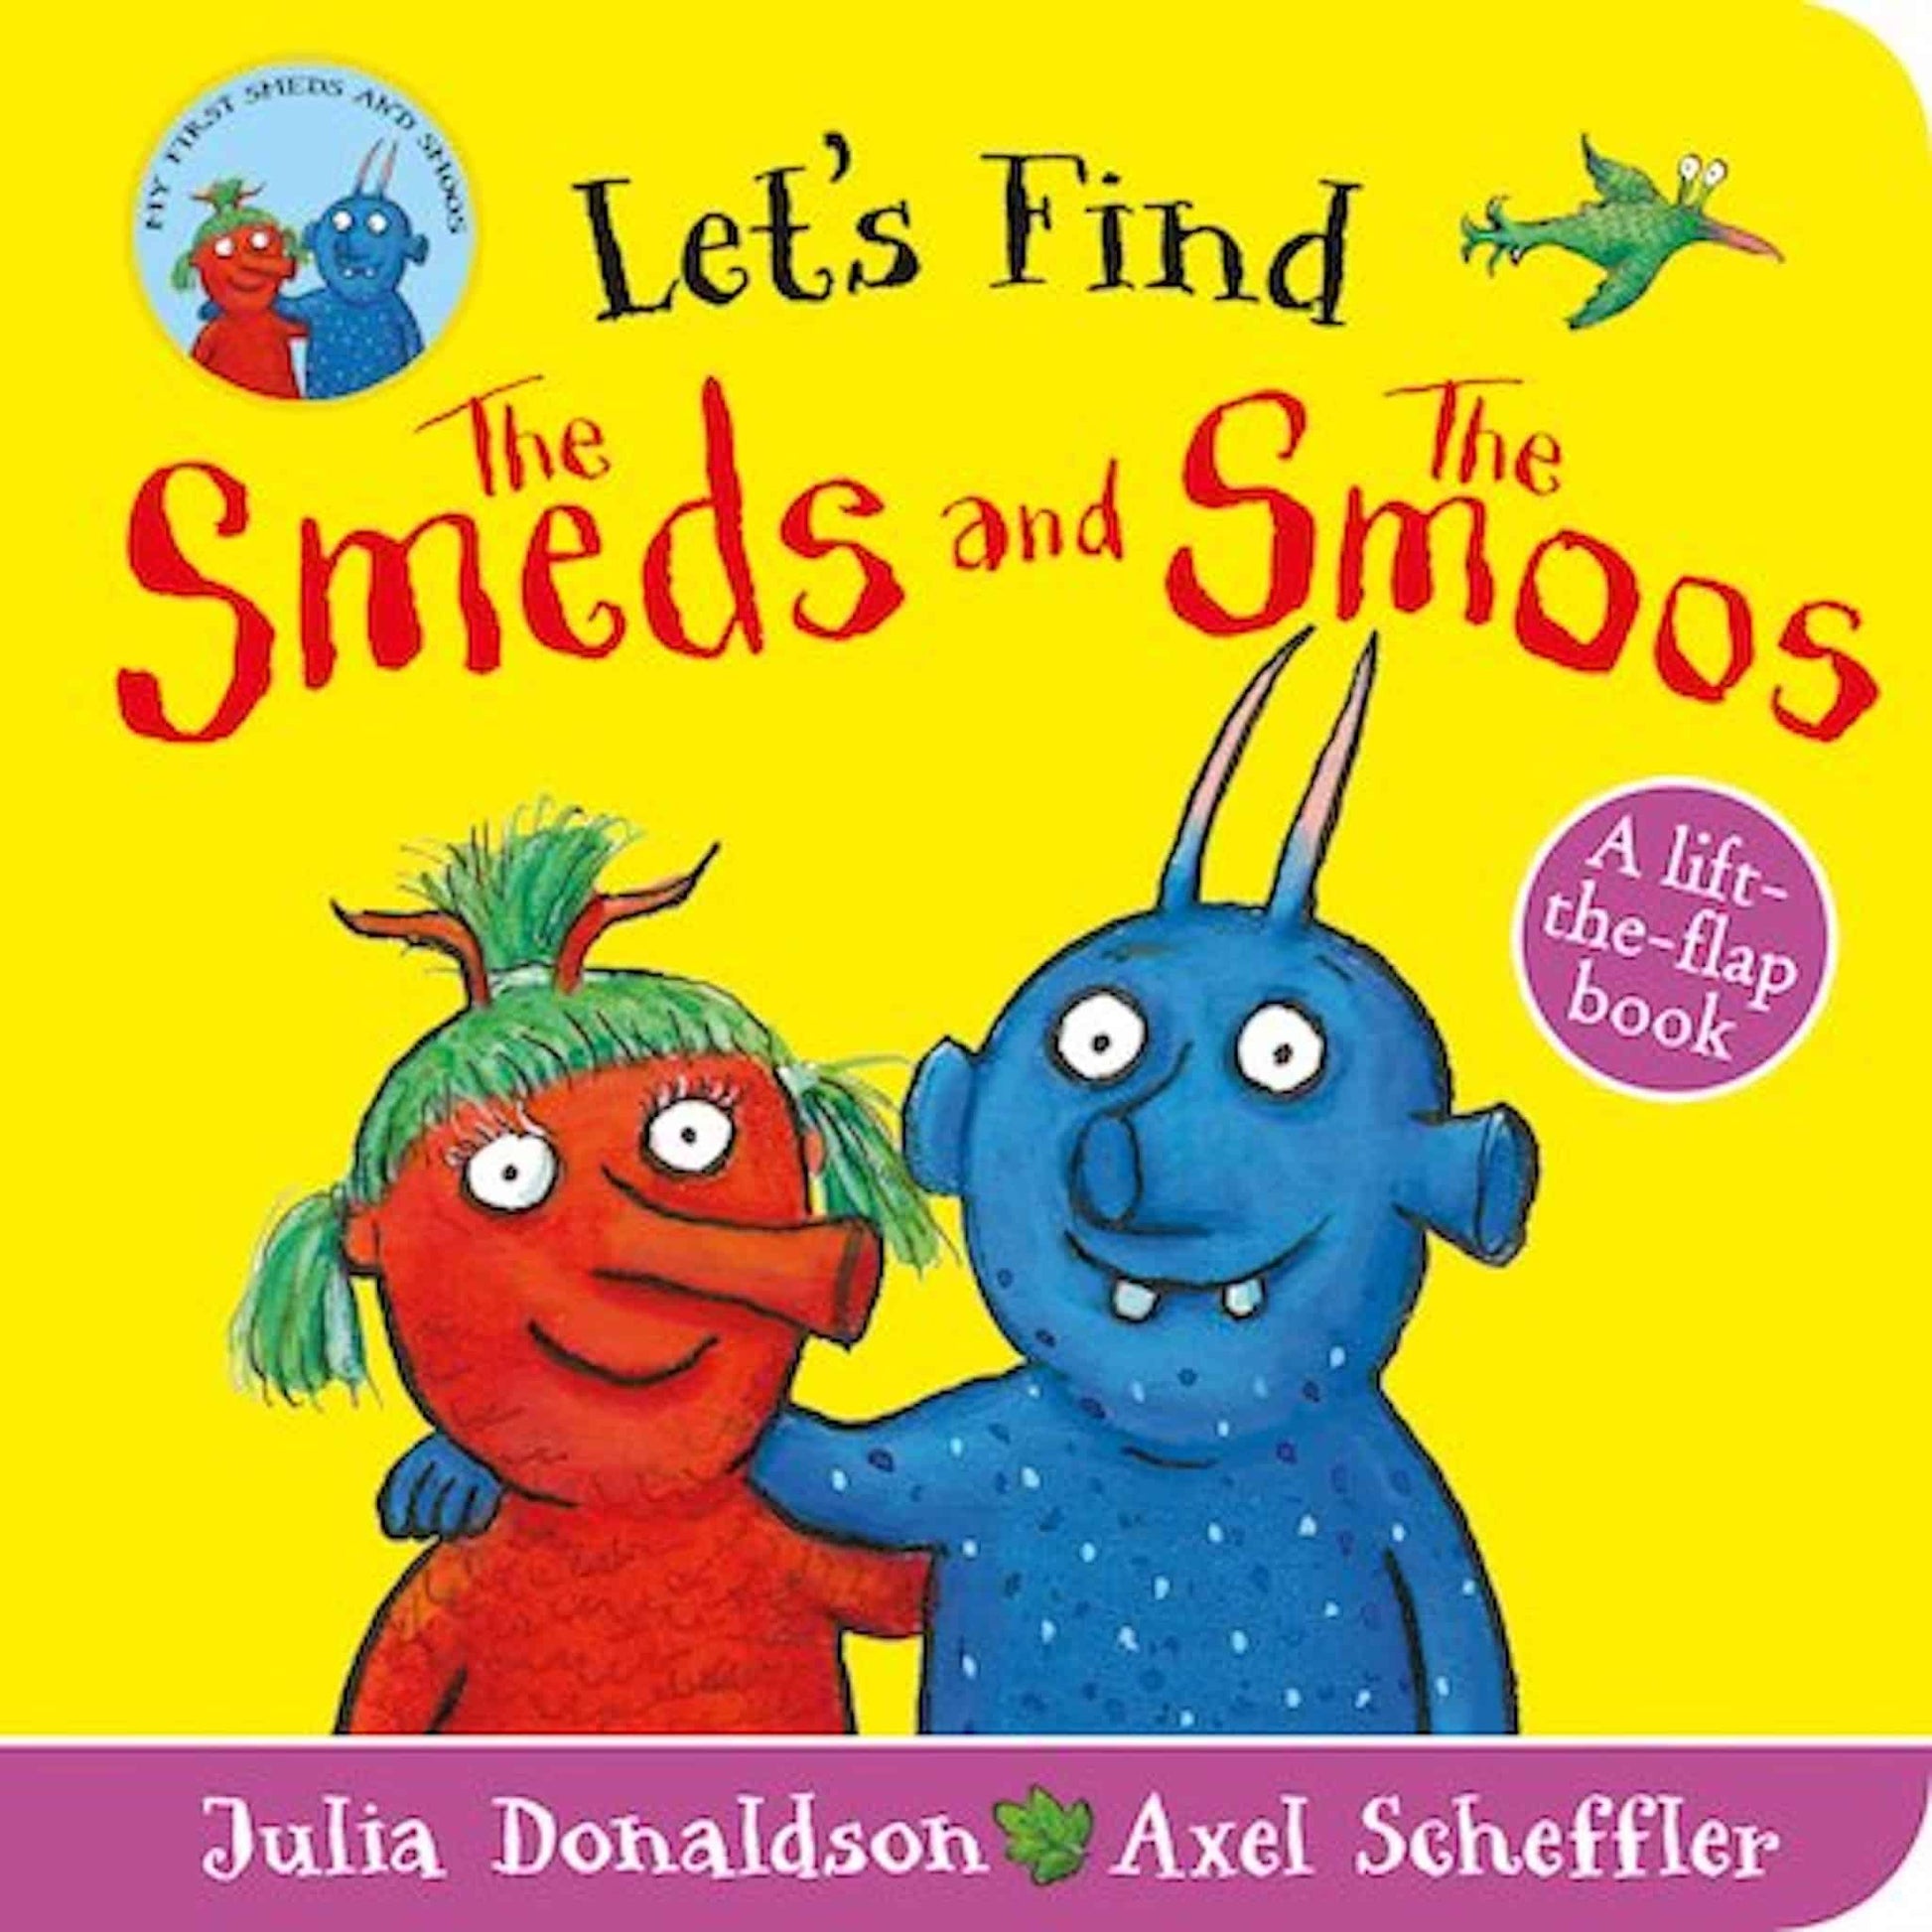 Scholastic Let's Find The Smeds and Smoos